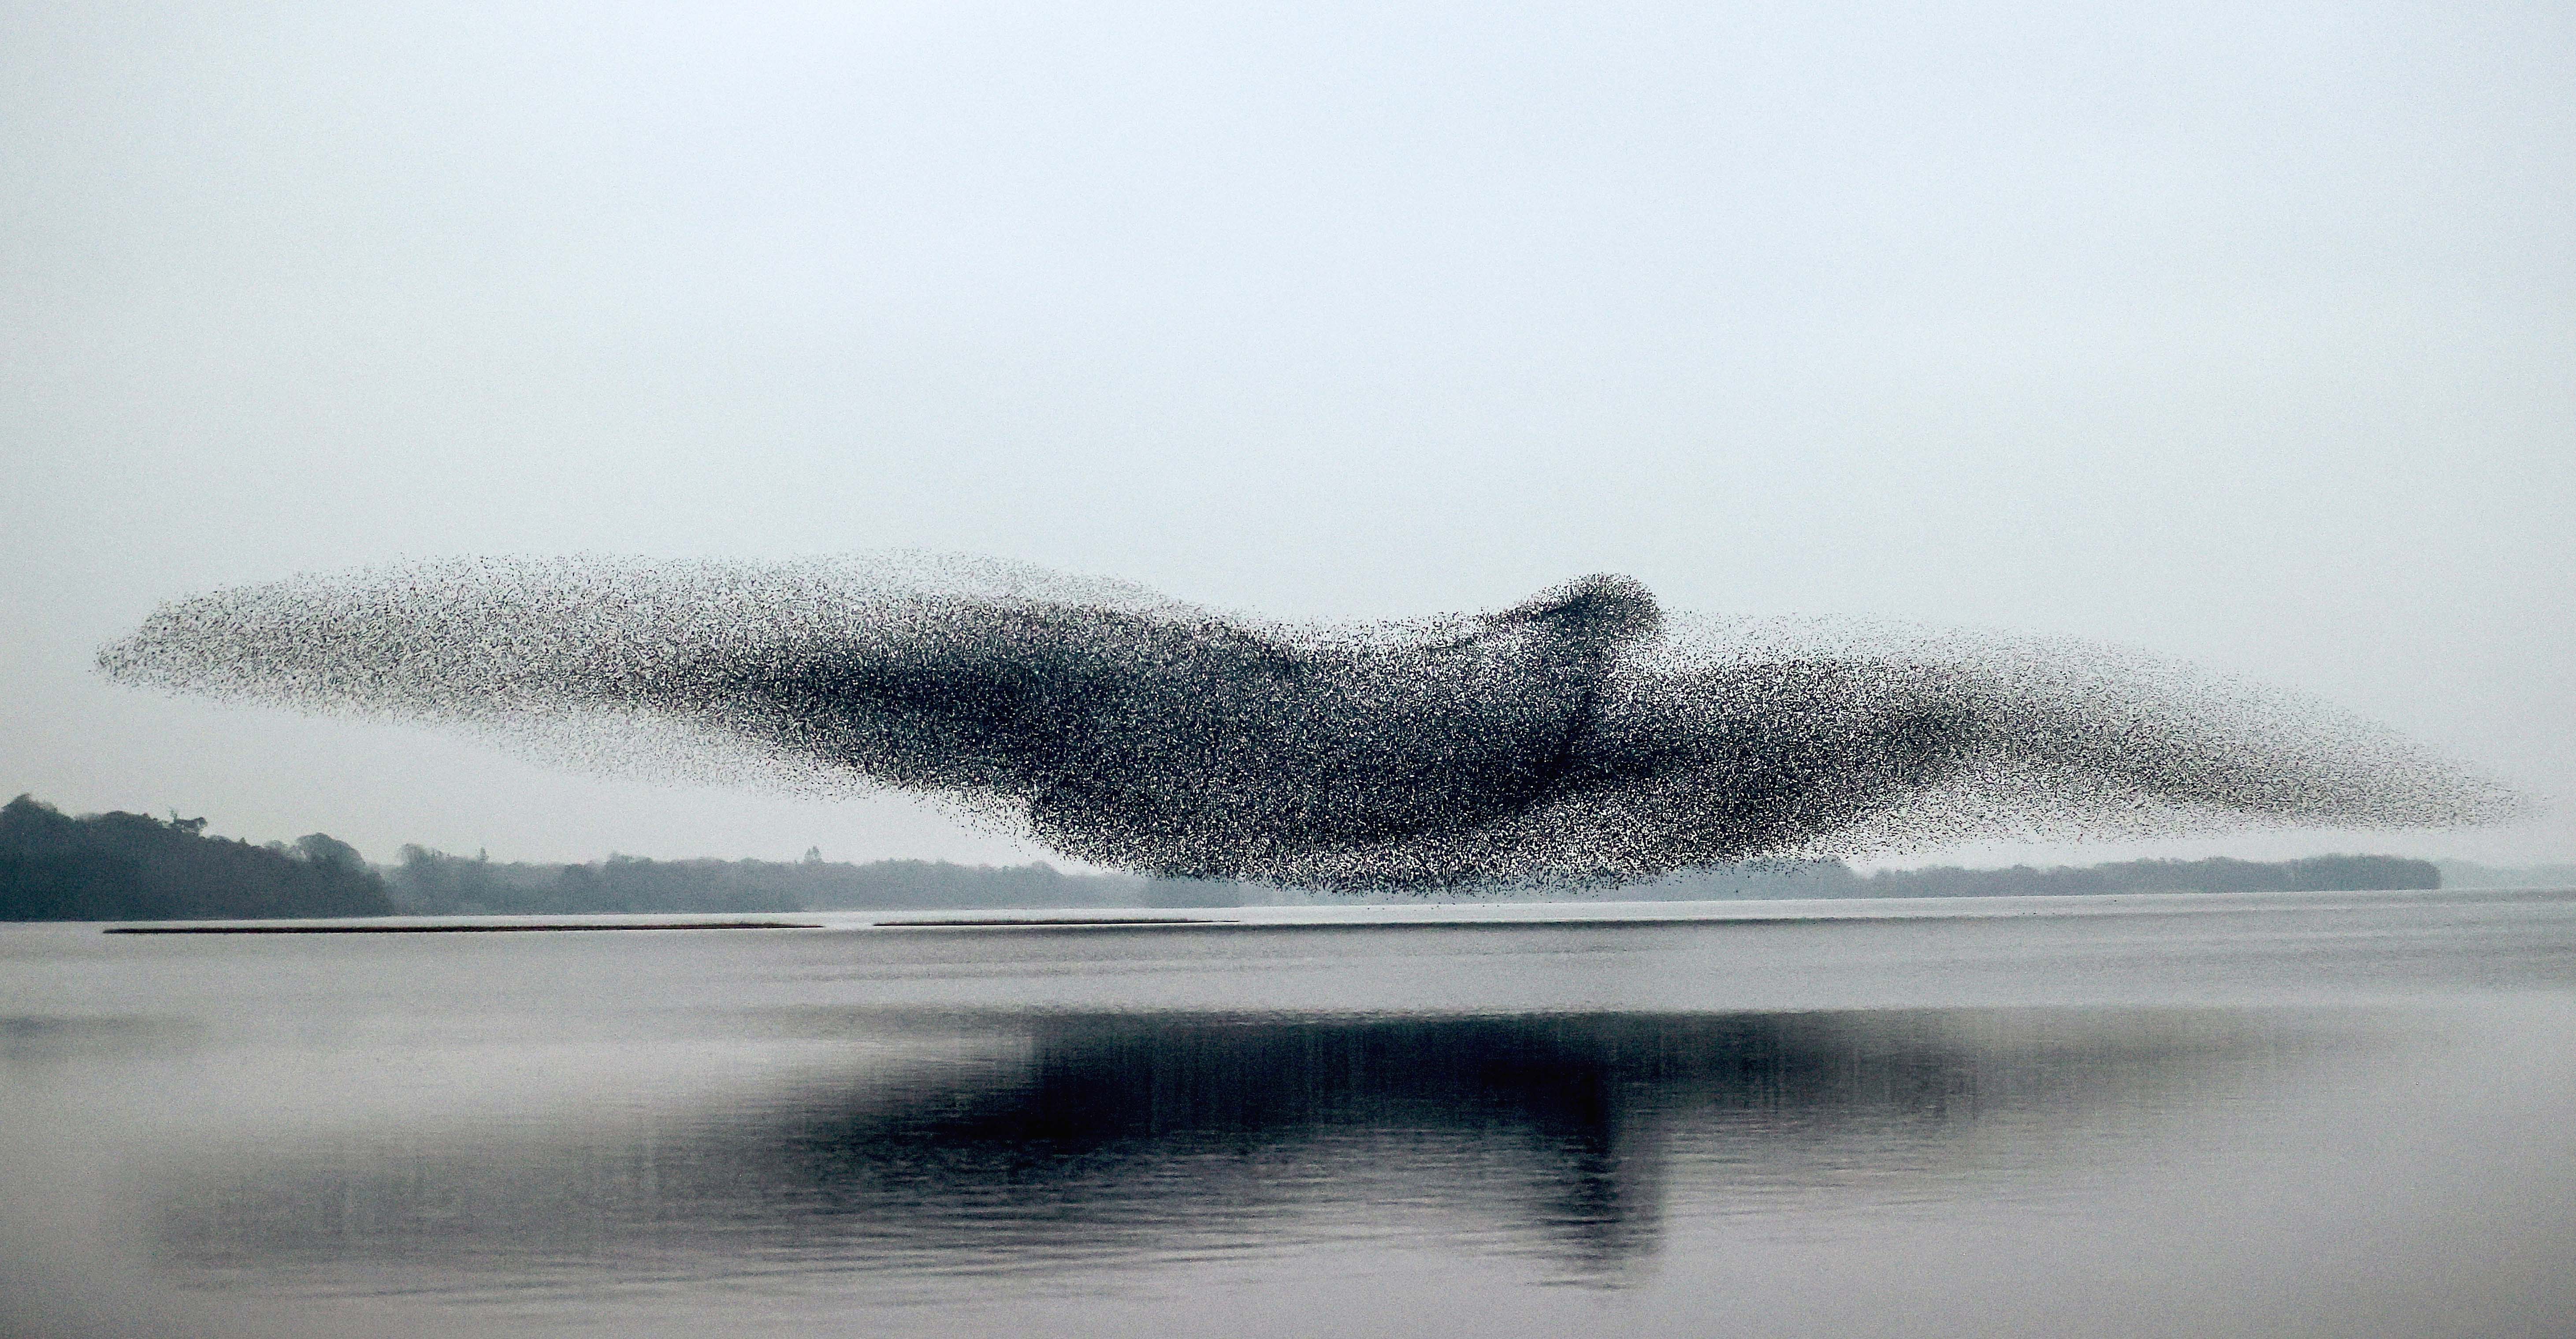 A murmuration of starlings over Lough Ennell in County Westmeath, Ireland